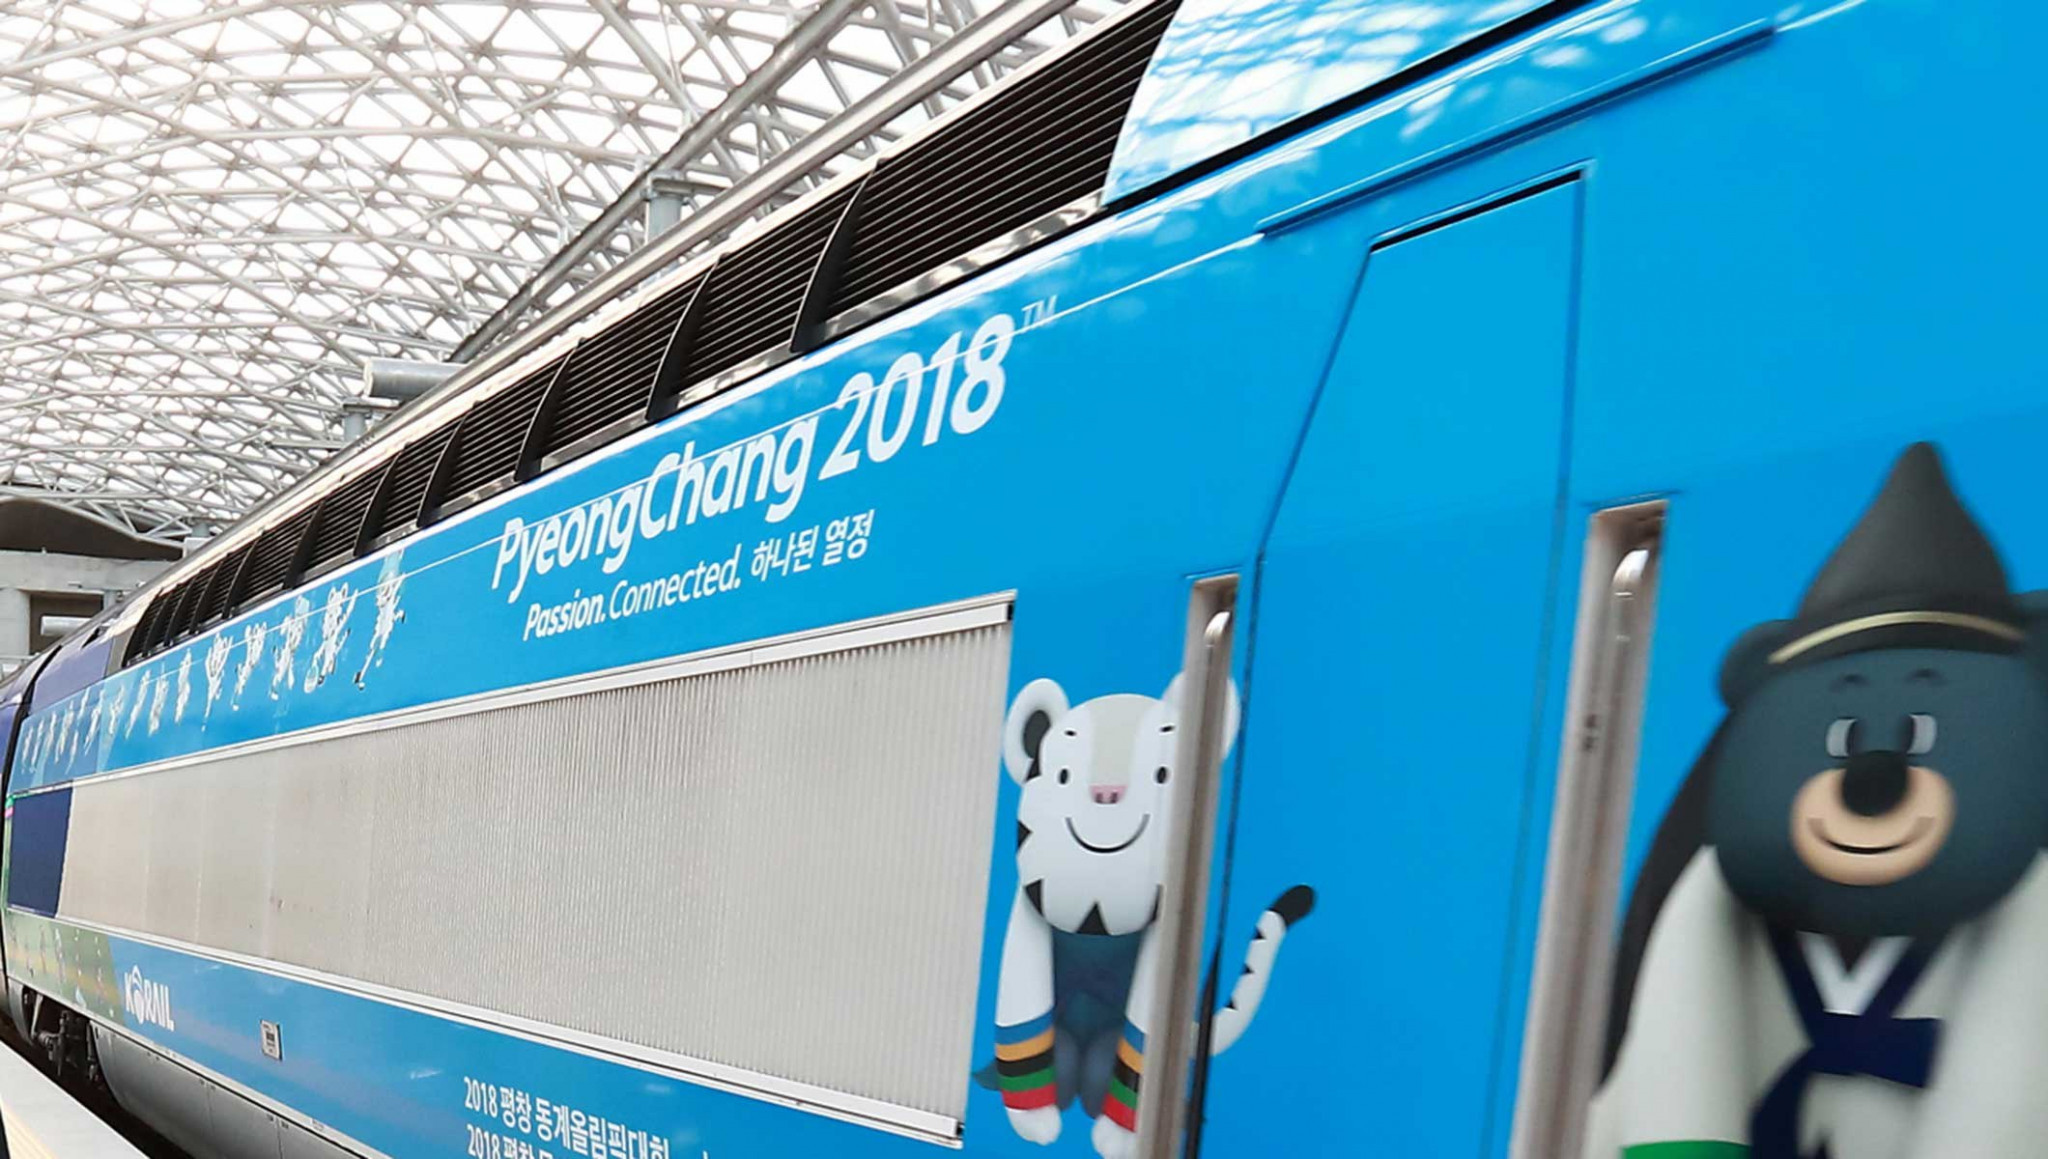 Pyeongchang 2018 Scrambling to Put in Place Measures to Ease Accommodation Fears